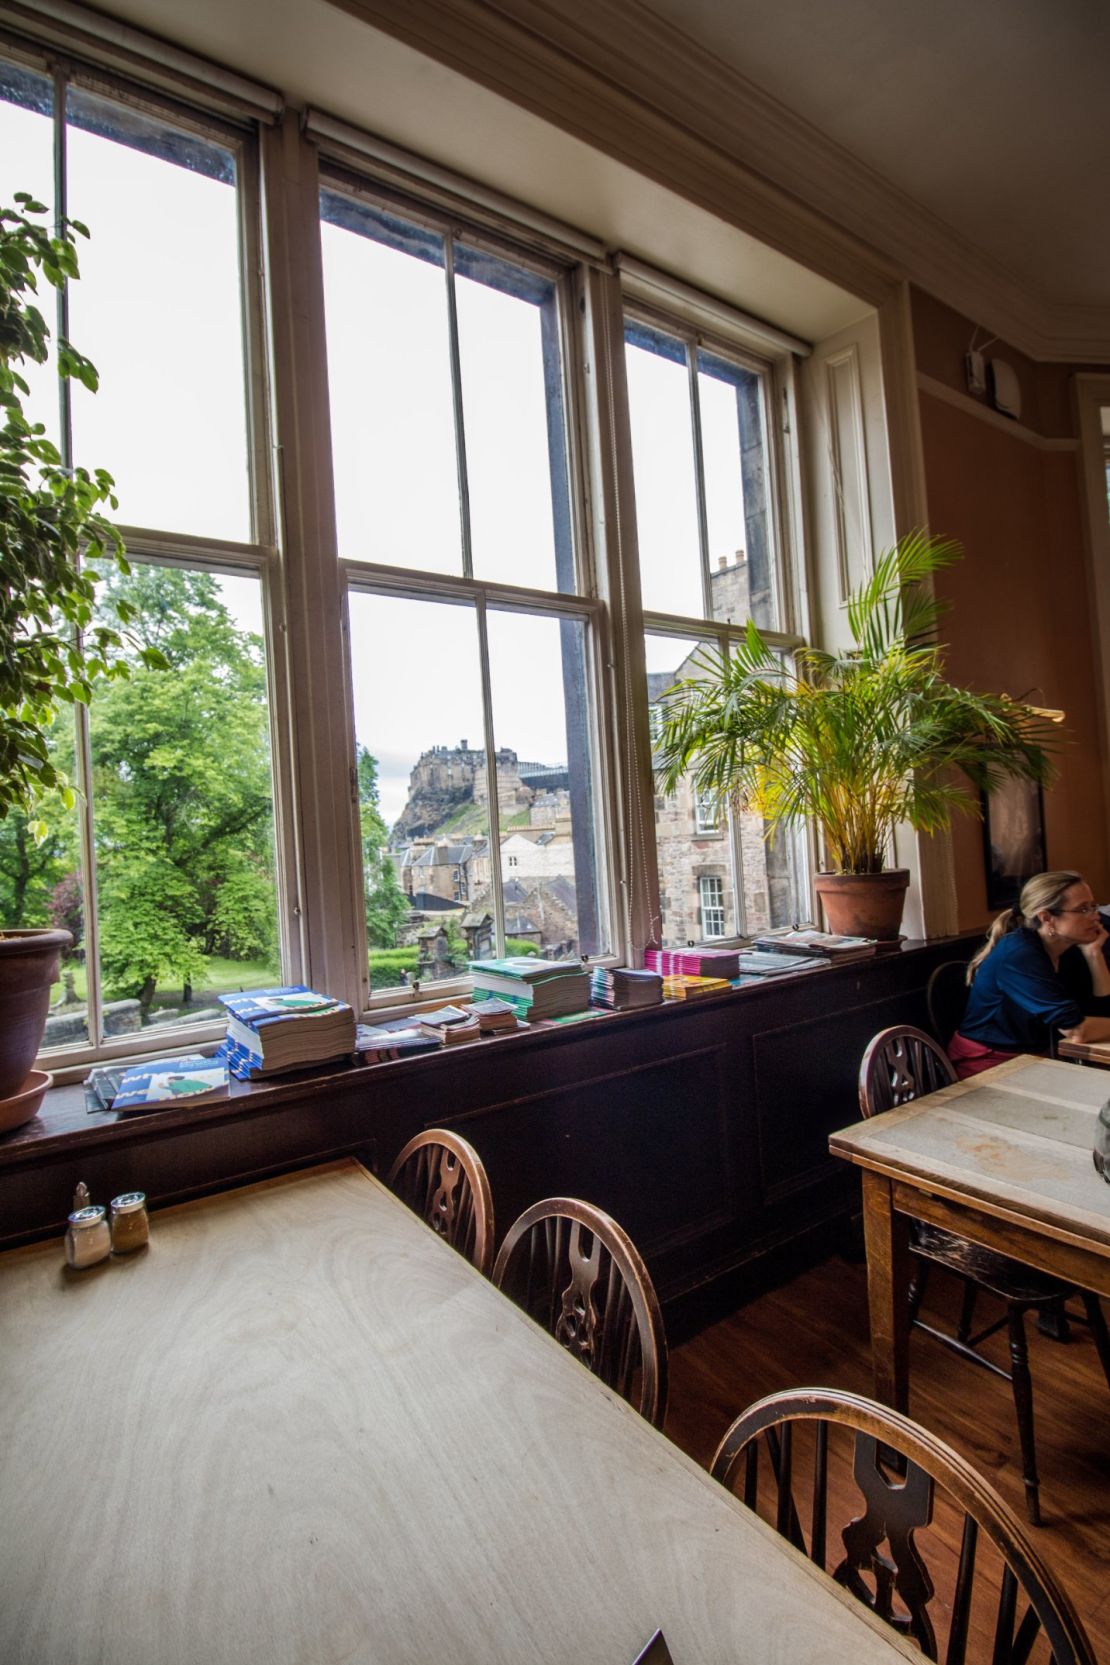 Grab the window seat at The Elephant House for maximum writing inspiration.